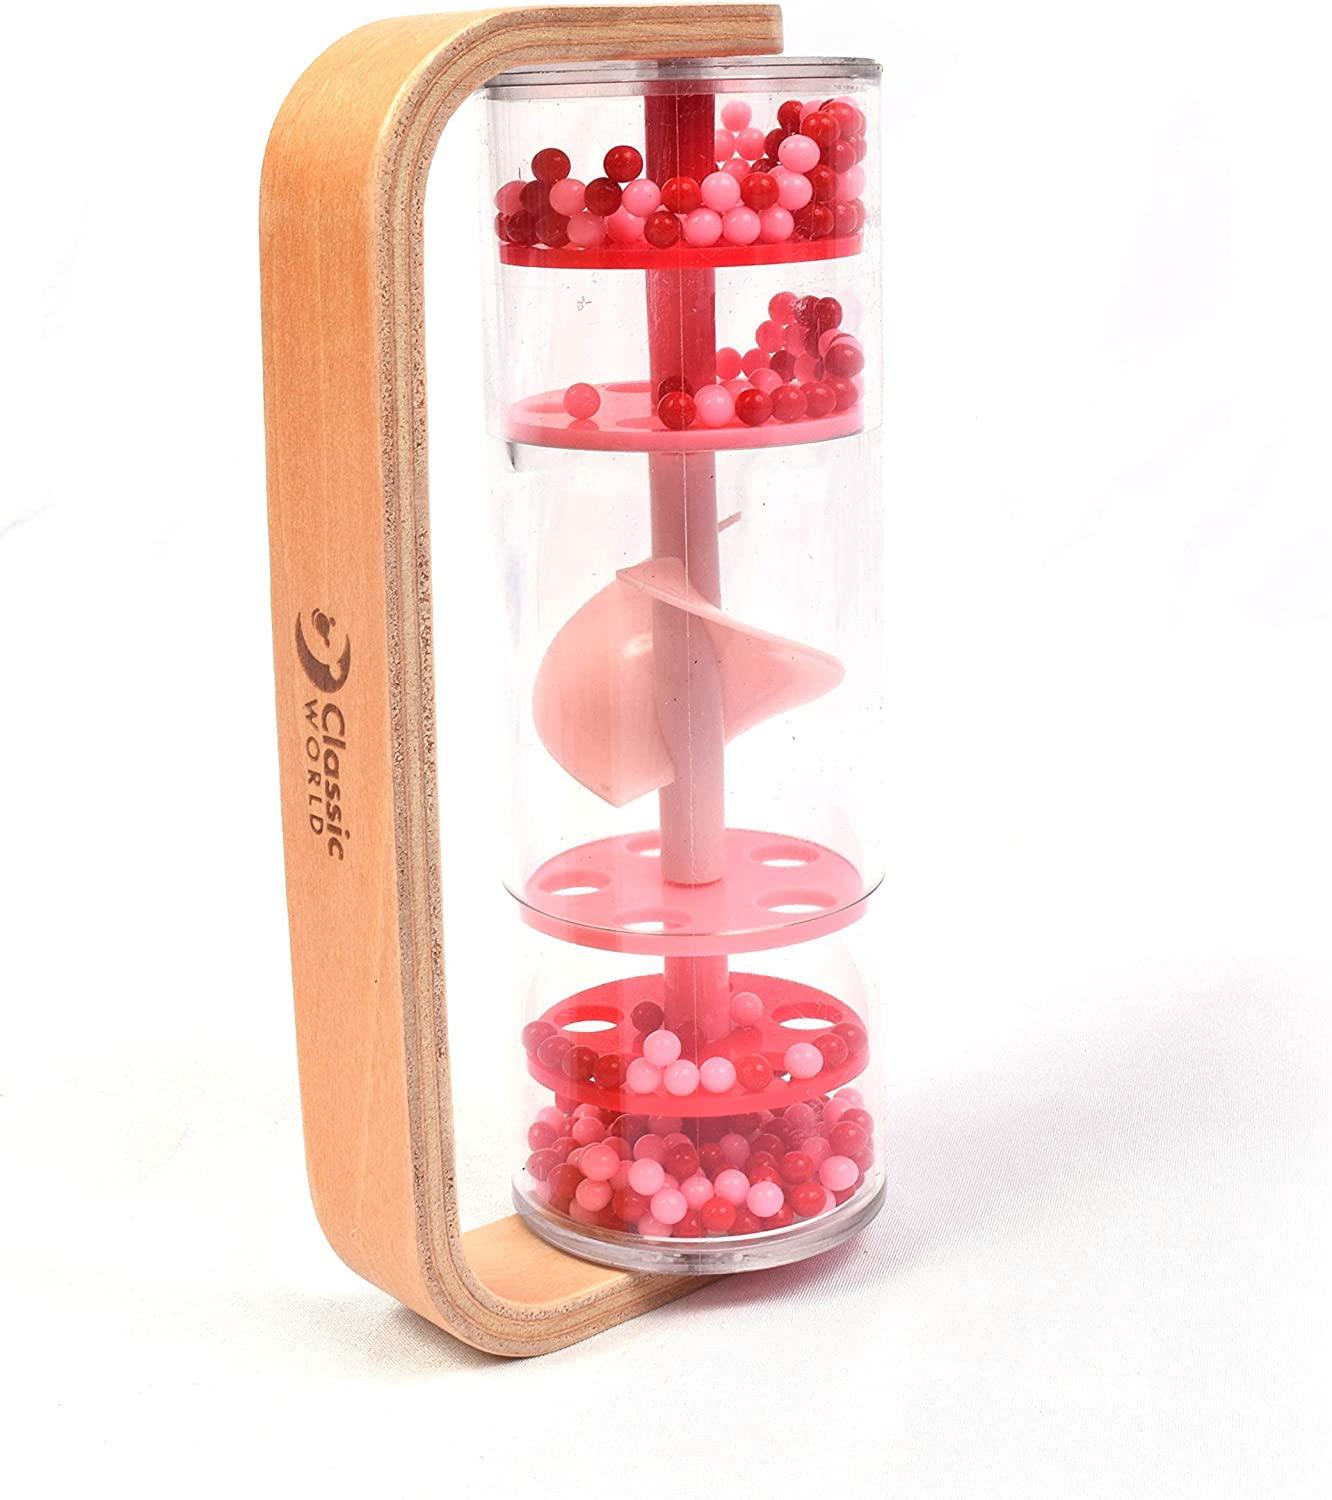 Wooden toy - rain of red balls - MoonyBoon